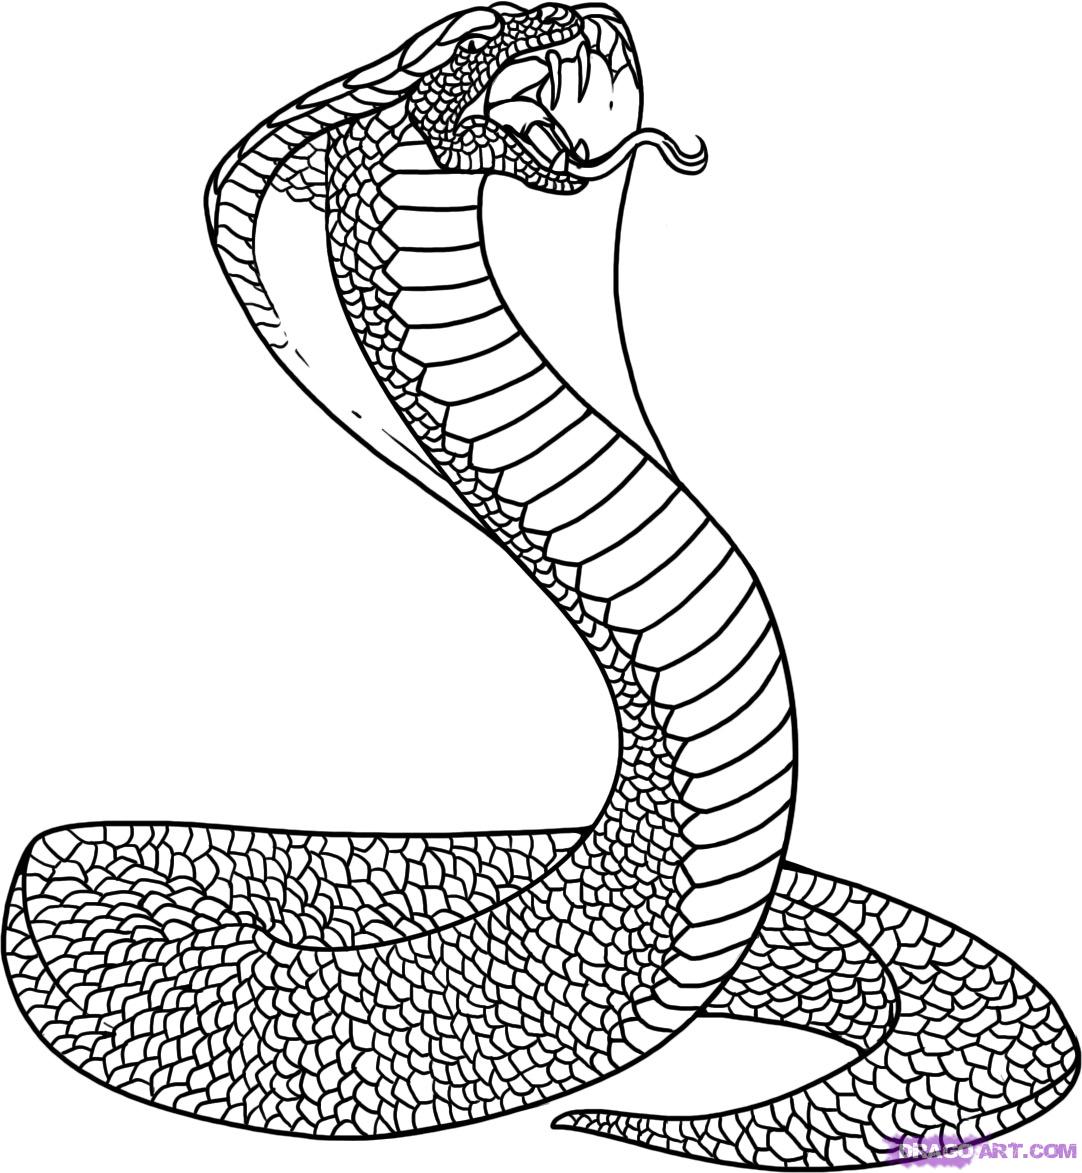 How To Draw A Snake, King Cobra, Step by Step, Snakes, Animals ...